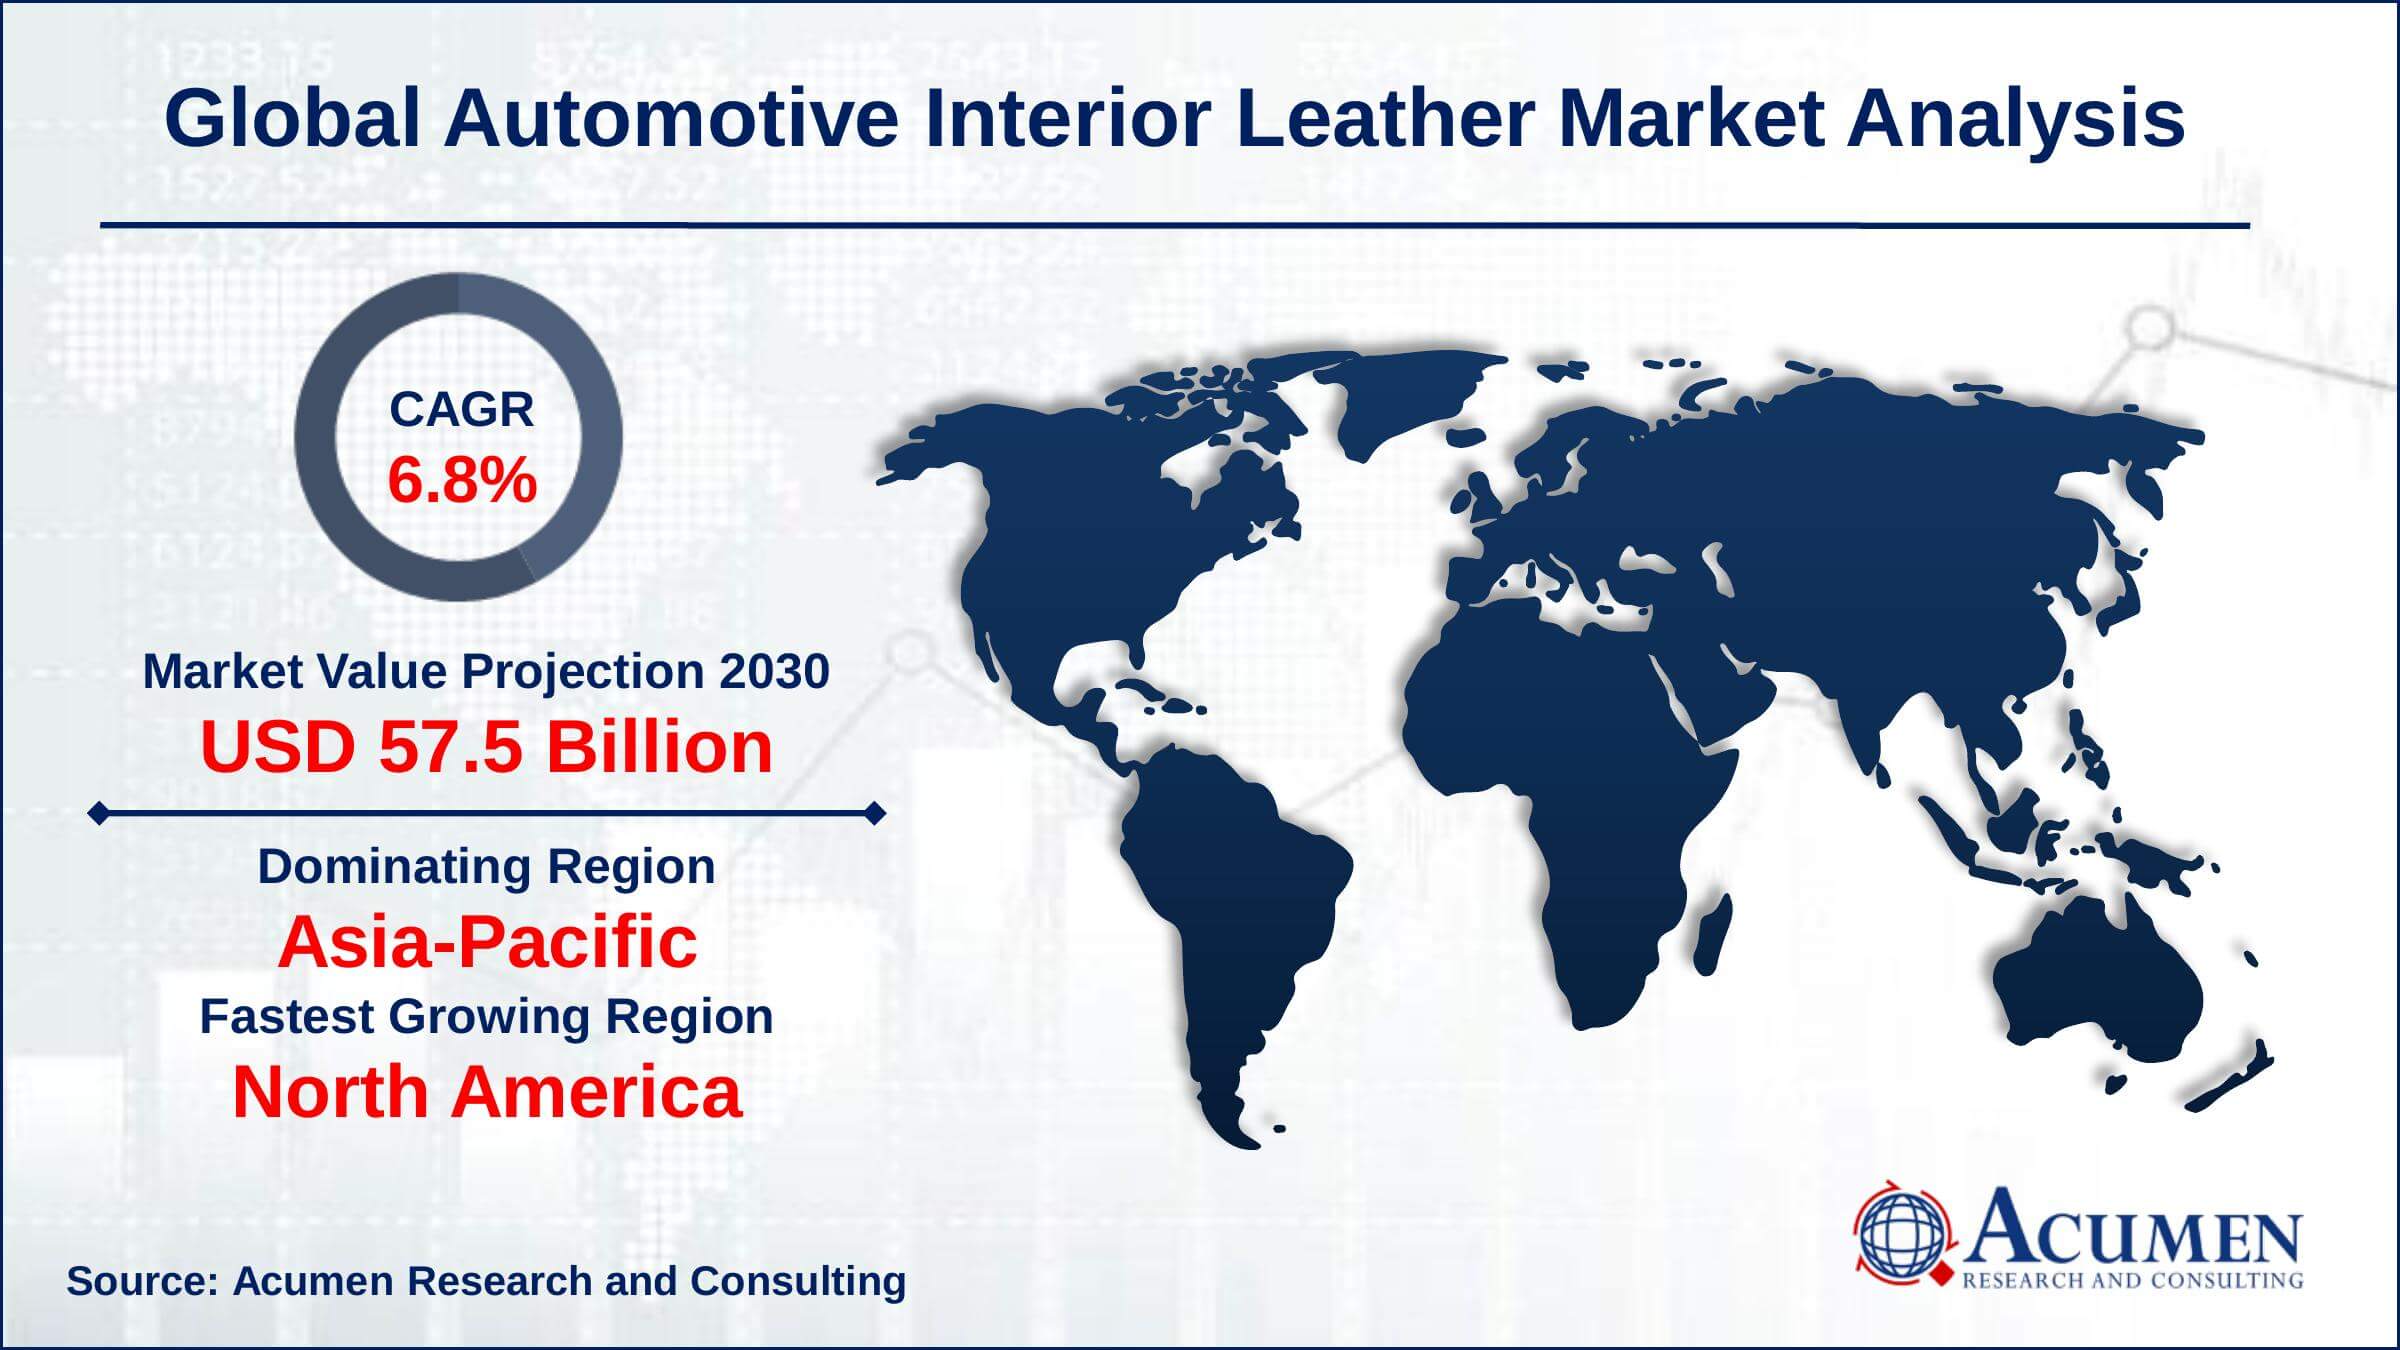 North America automotive interior leather market growth will record noteworthy CAGR of over 7% from 2022 to 2030